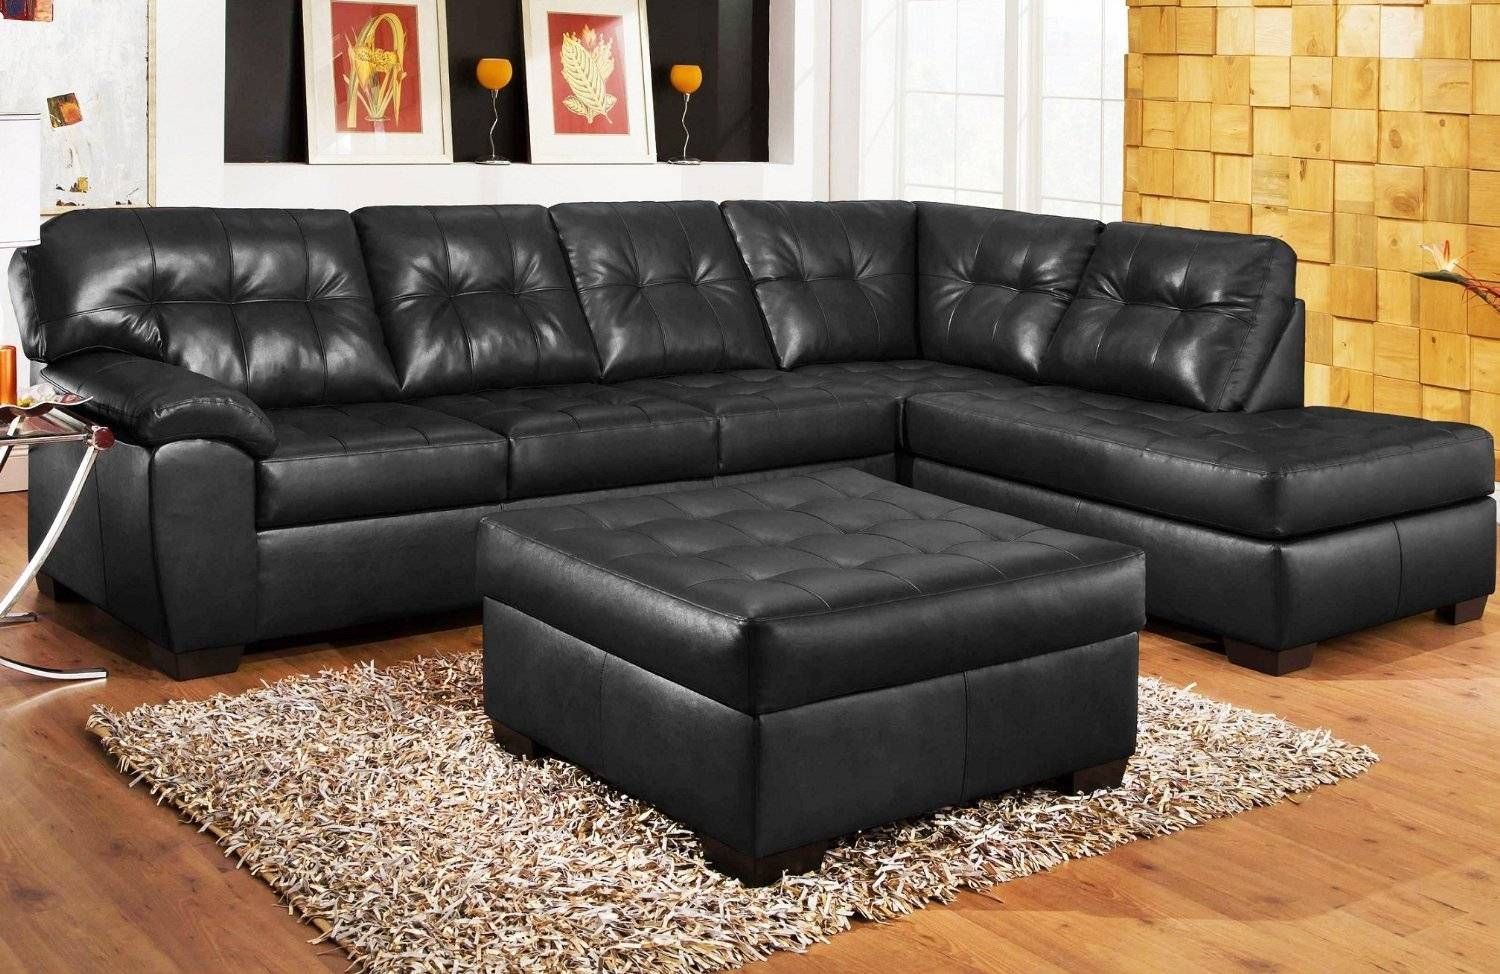 Black Leather Sectional Sofa Roselawnlutheran For Black Leather Sectional Sleeper Sofas 